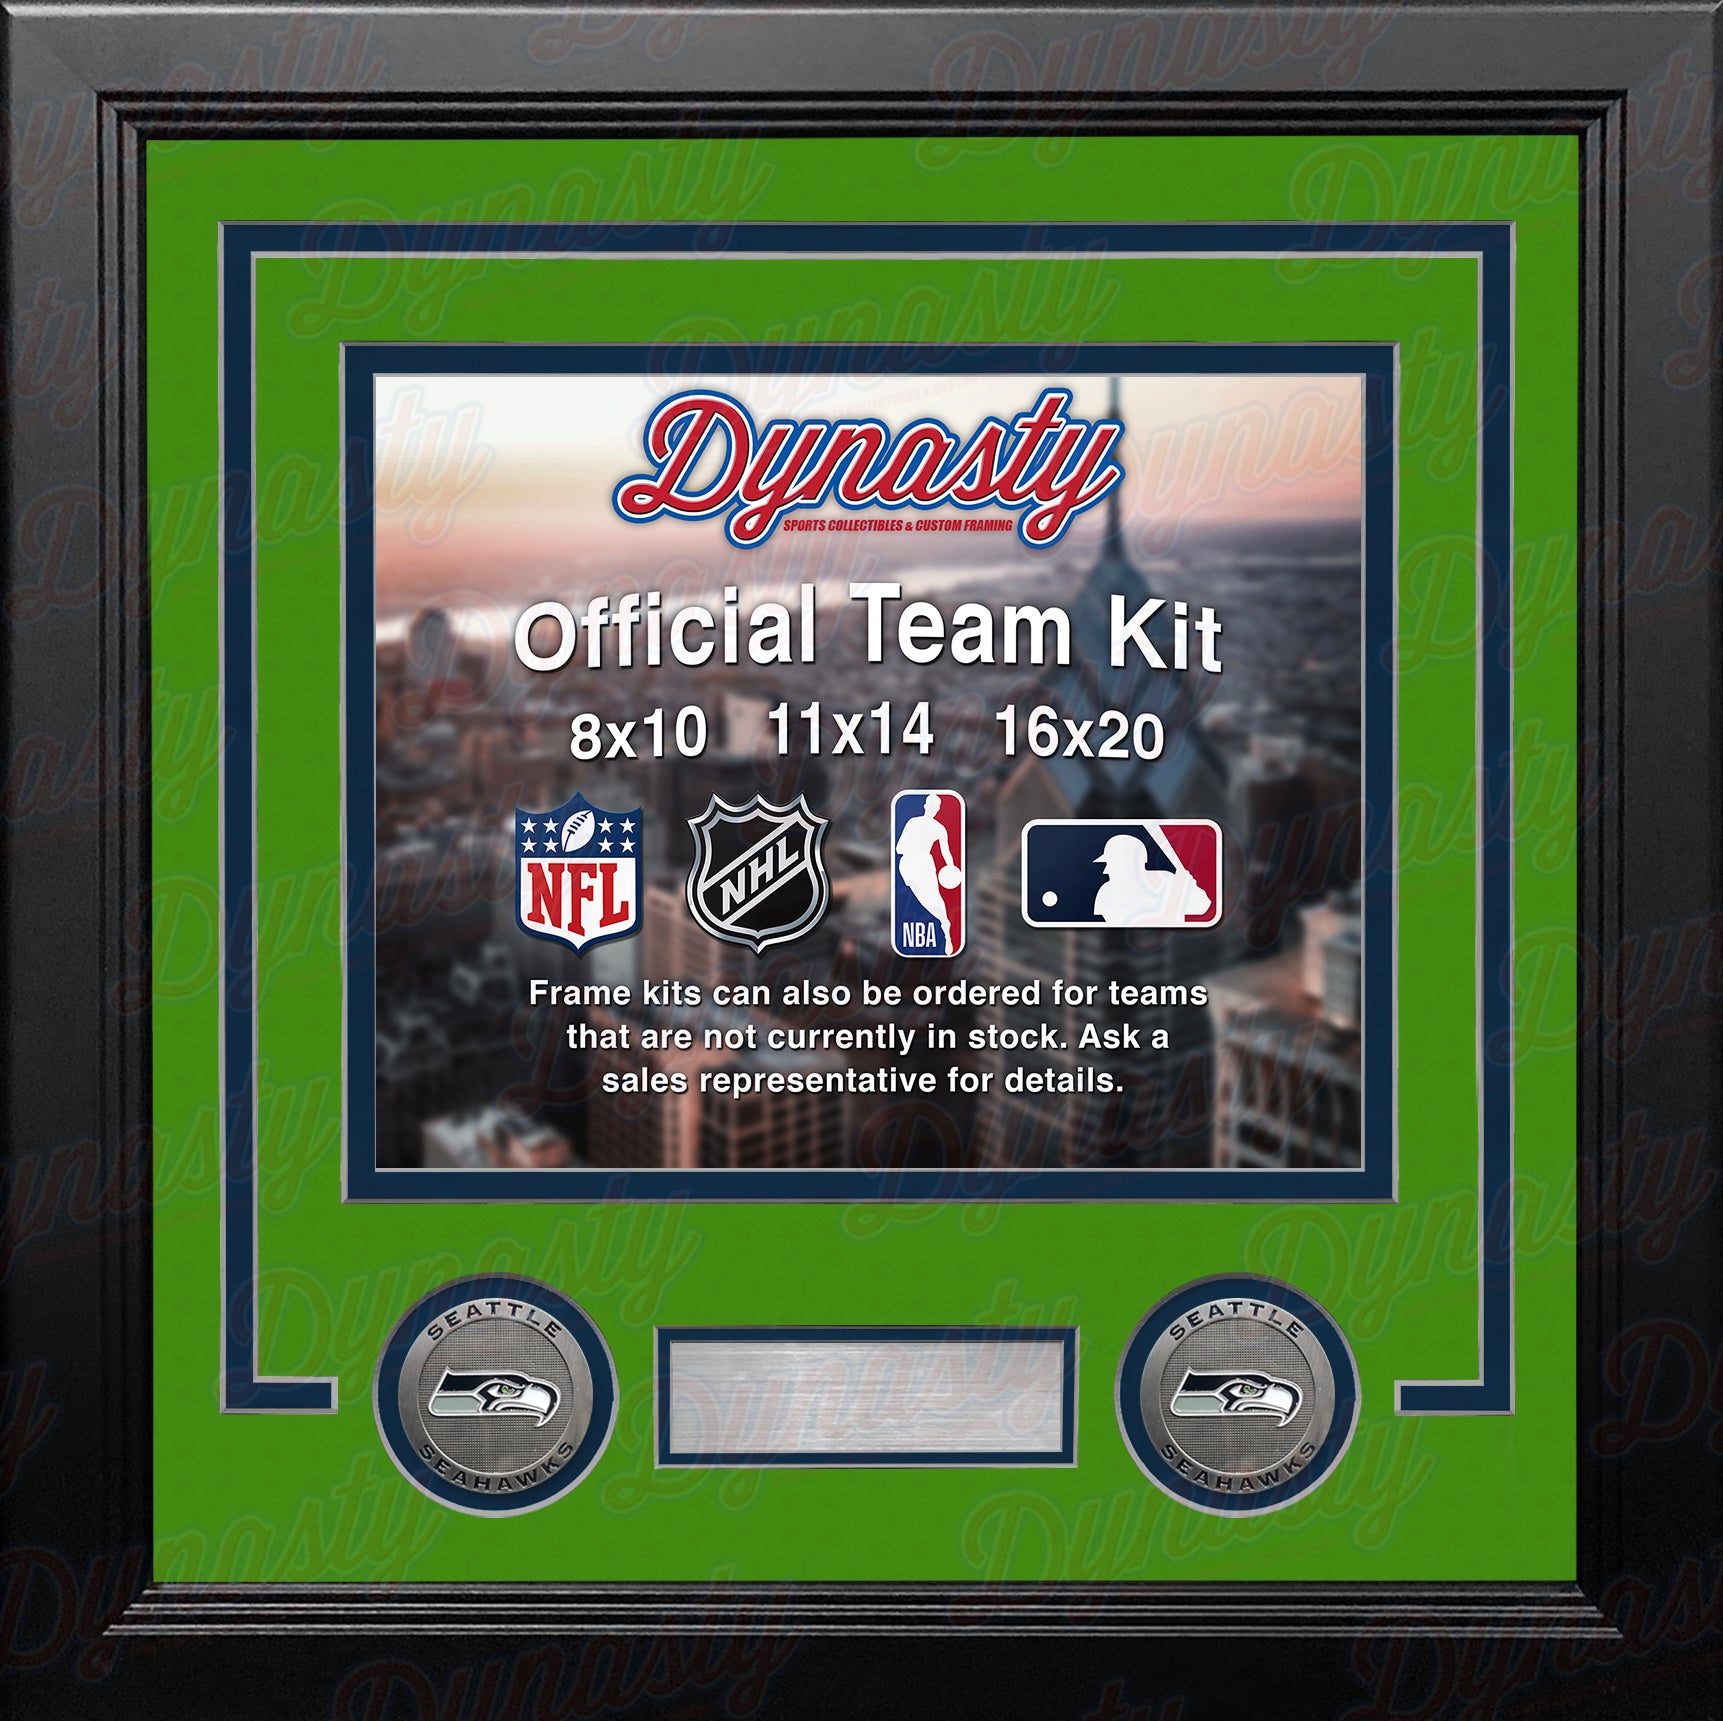 NFL Football Photo Picture Frame Kit - Seattle Seahawks (Lime Matting, Navy Trim) - Dynasty Sports & Framing 